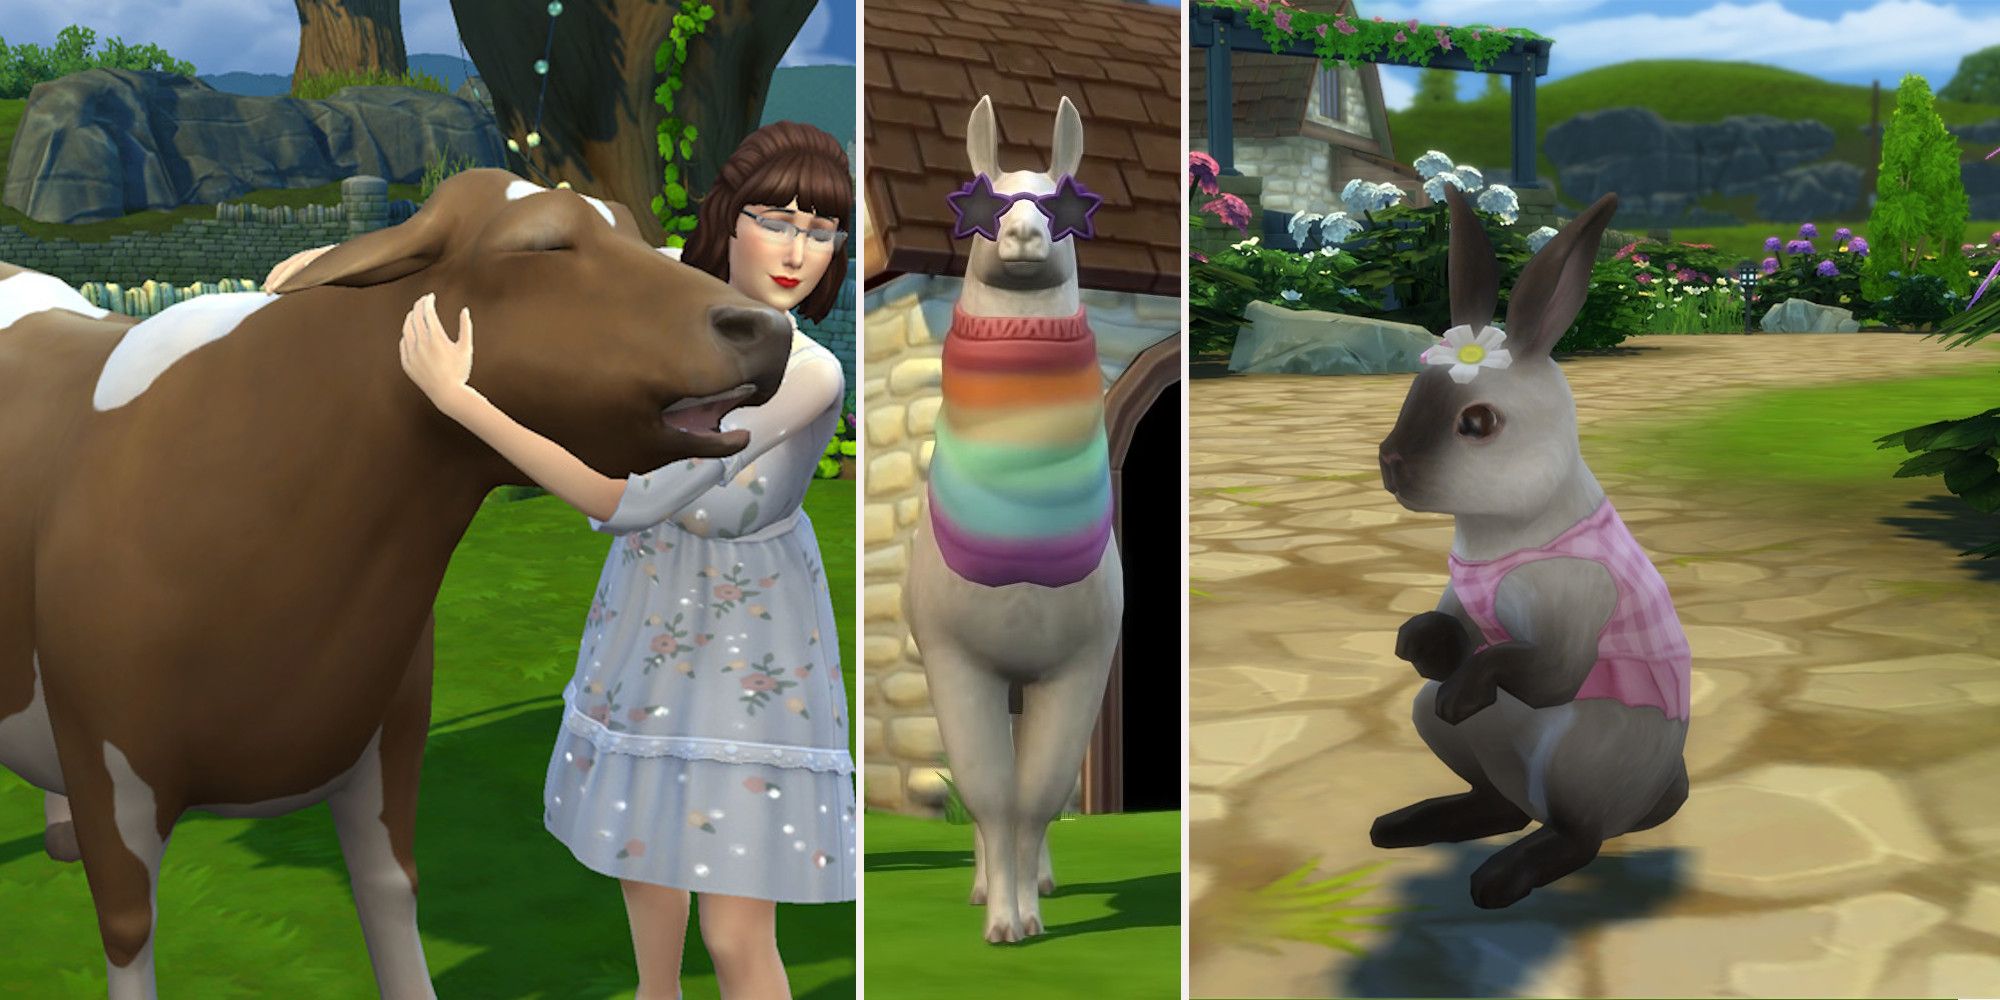 Breeding cows llamas rabbits The Sims 4 cats and dogs Cottage Living steam simscommunity xboxplayGame